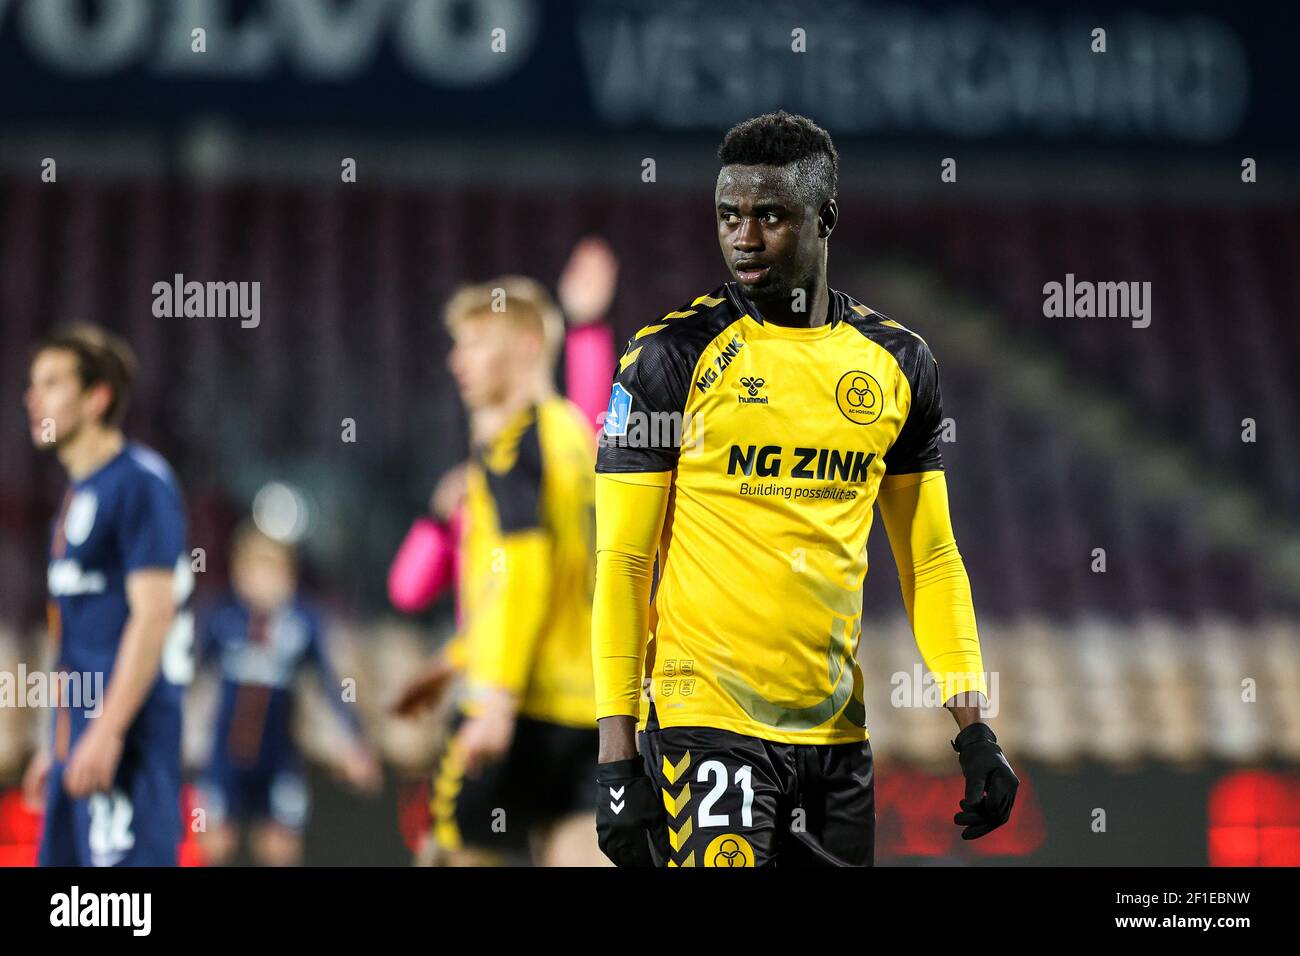 Farum, Denmark. 7th Mar, 2021. James Gomez (21) of AC Horsens seen during  the 3F Superliga match between FC Nordsjaelland and AC Horsens in Right to  Dream Park in Farum. (Photo Credit: